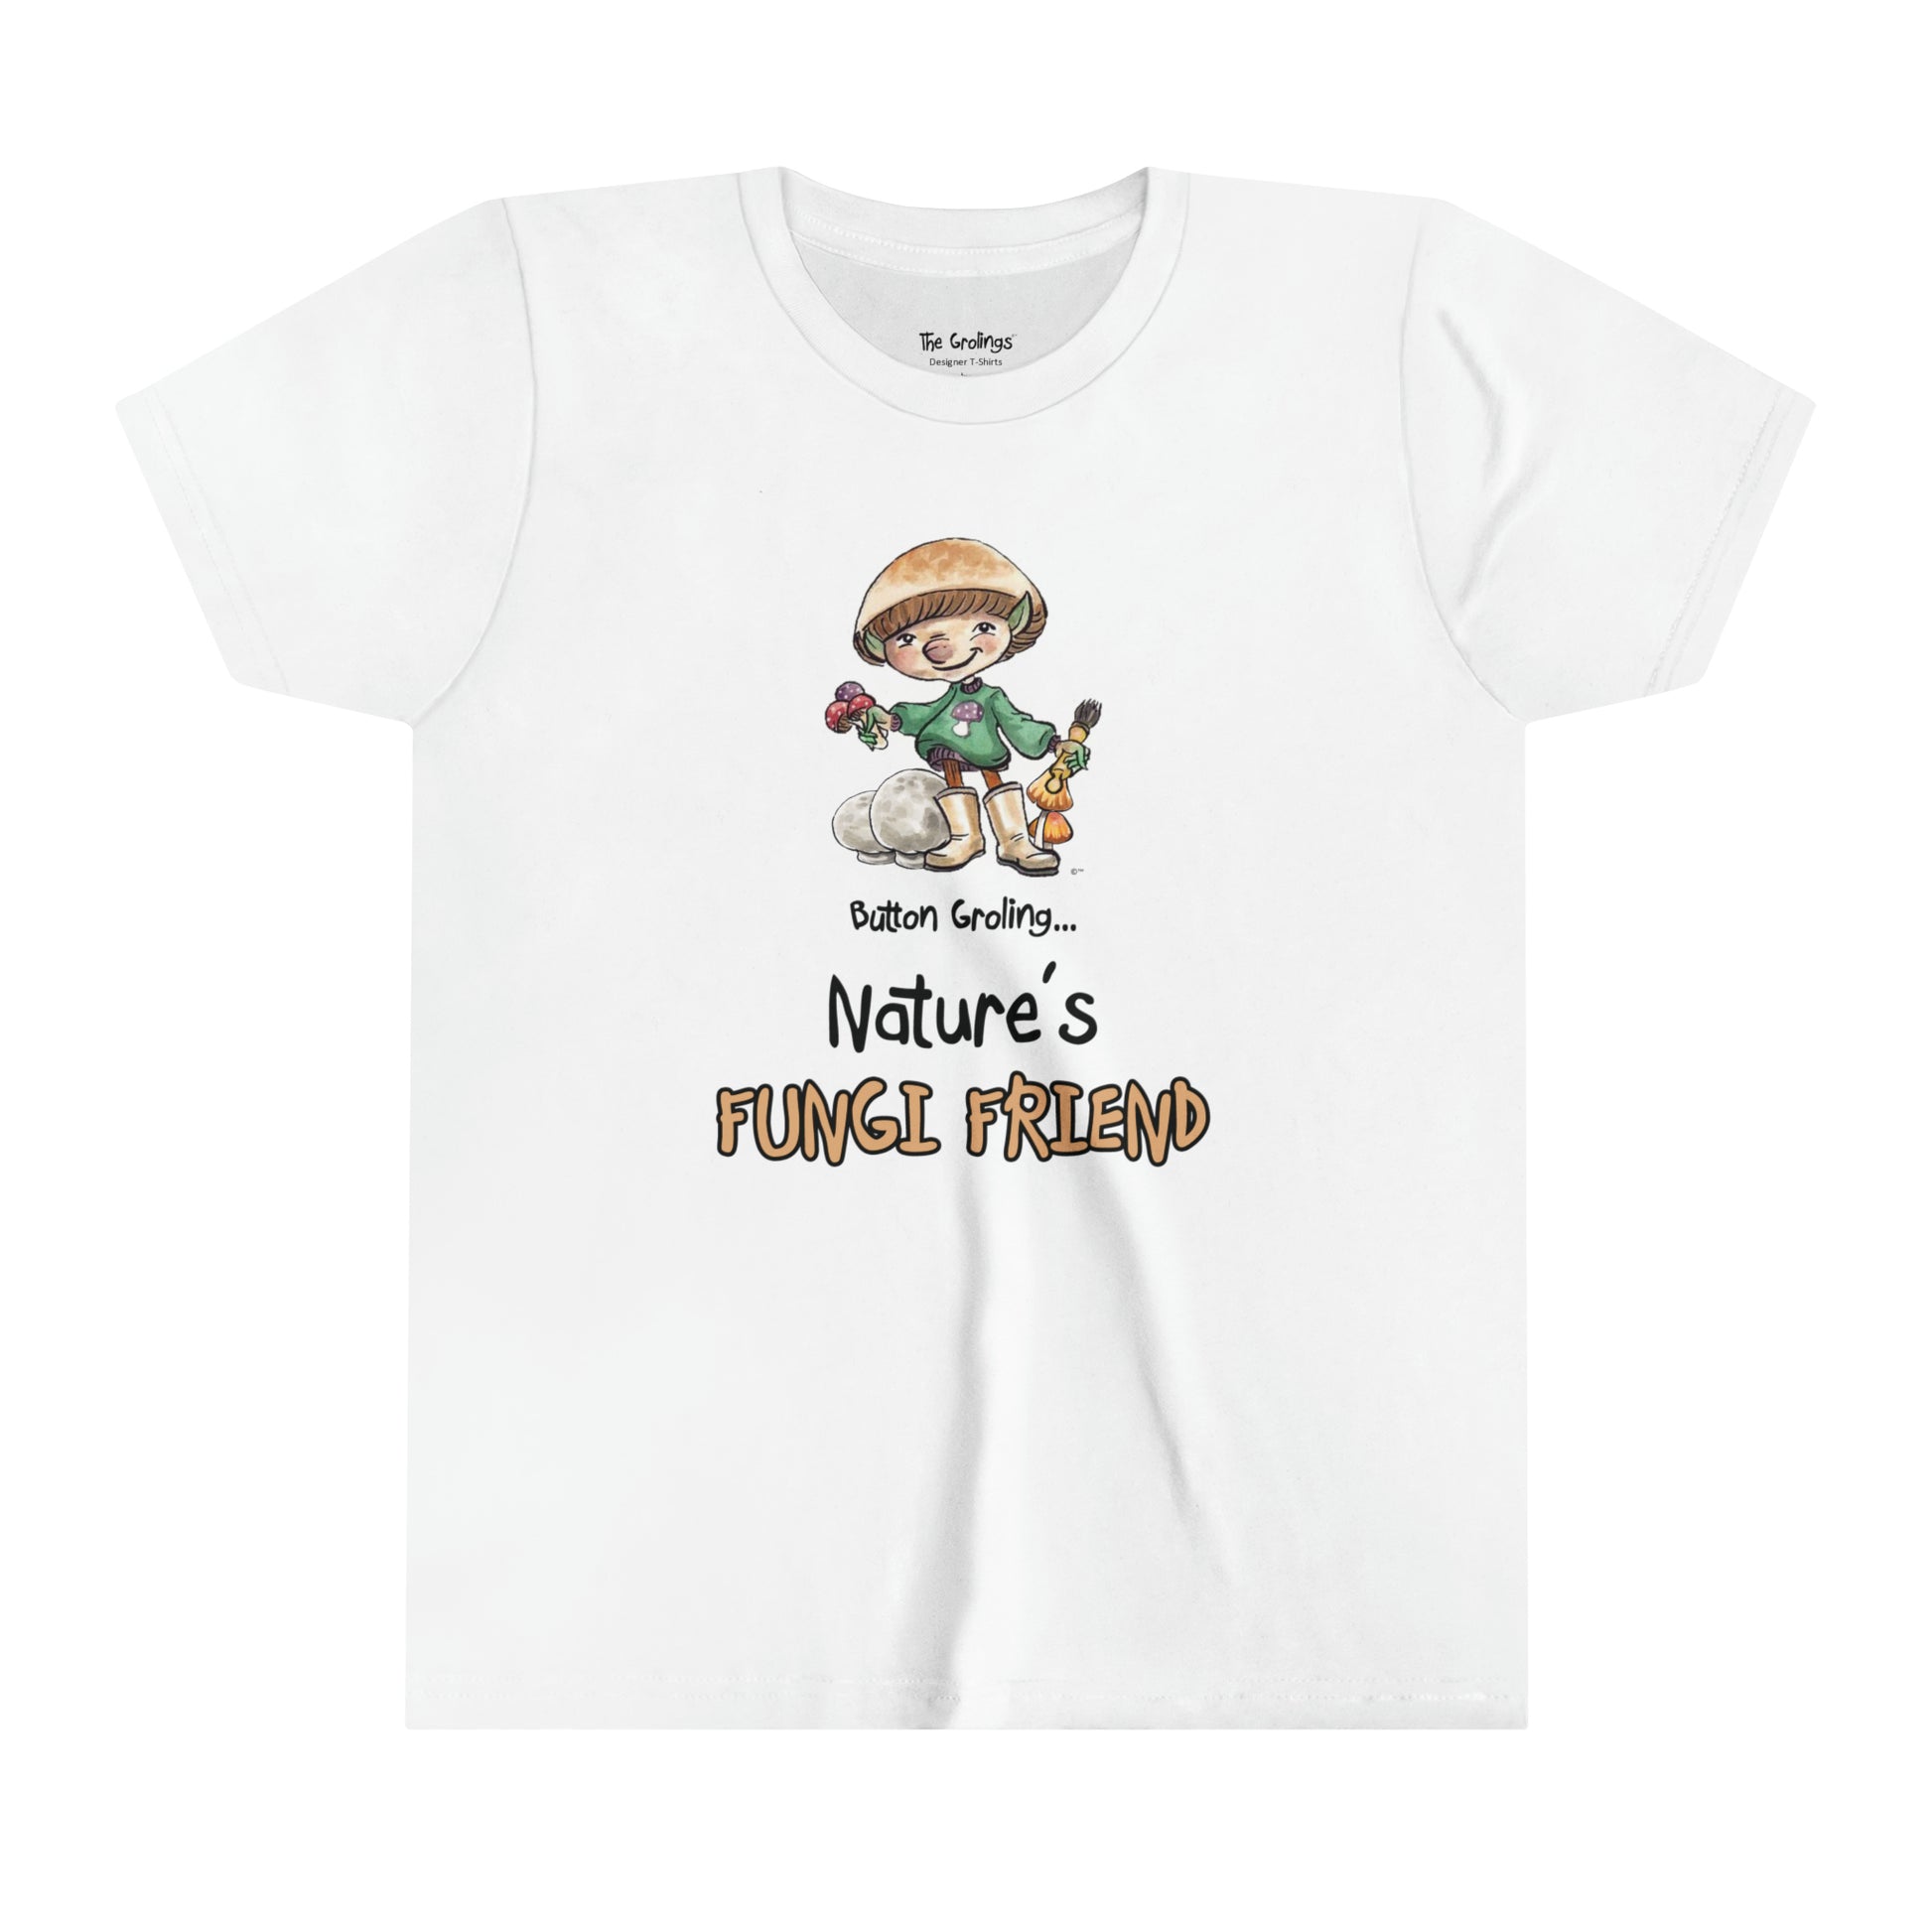 A white official USA Grolings kids' t-shirt, featuring the phrase 'Button Groling... Nature’s Fungi Friend.' The t-shirt showcases Button Groling, holding a little group of toadstools in one hand and a mushroom brush in the other. Beside Button Groling, there are two large puffball mushrooms, symbolising the importance of fungi in the forest ecosystem.